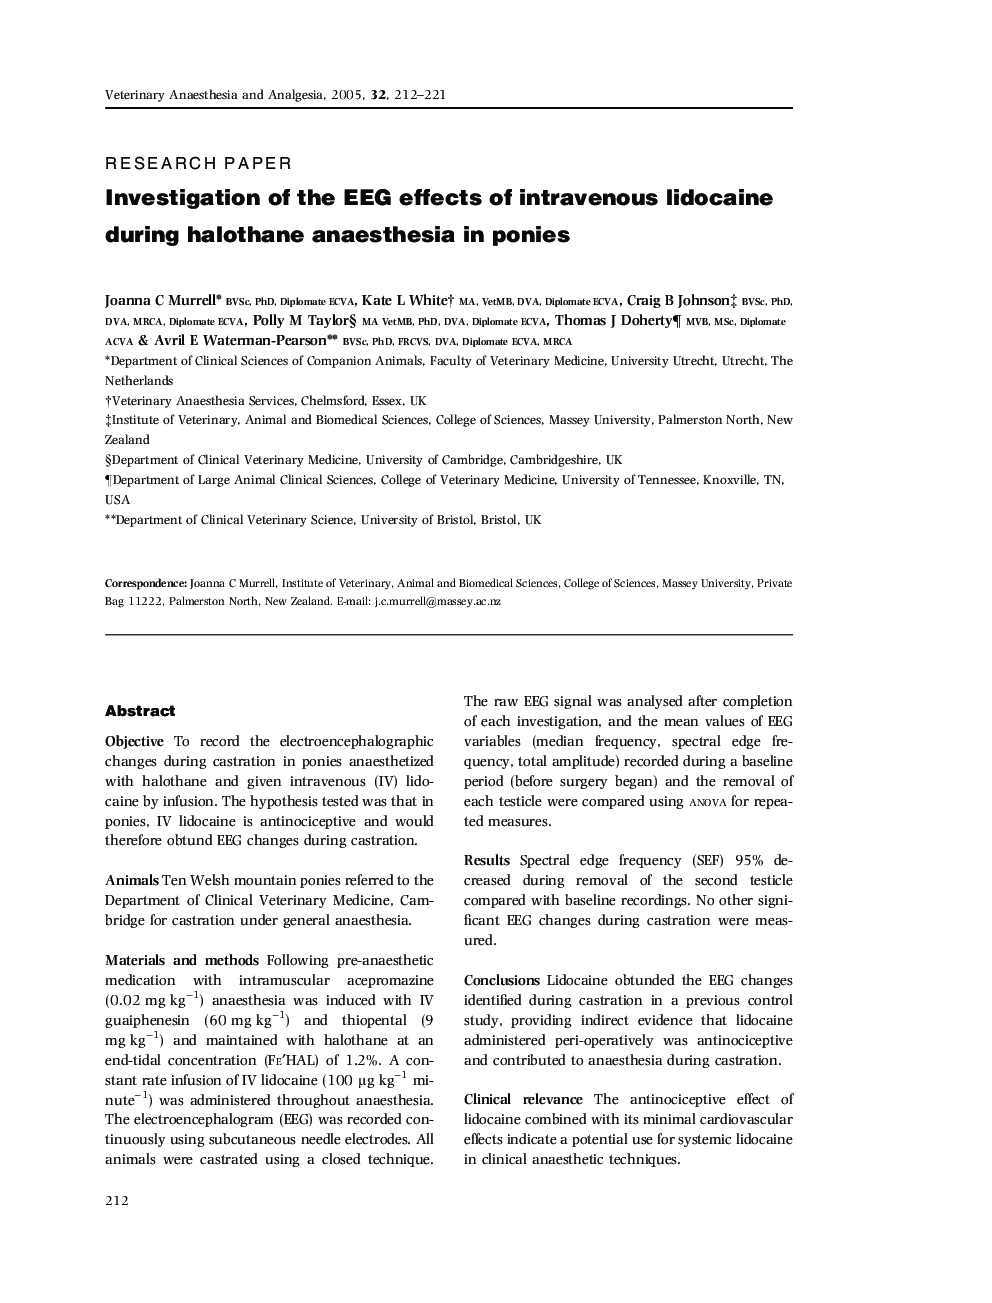 Investigation of the EEG effects of intravenous lidocaine during halothane anaesthesia in ponies